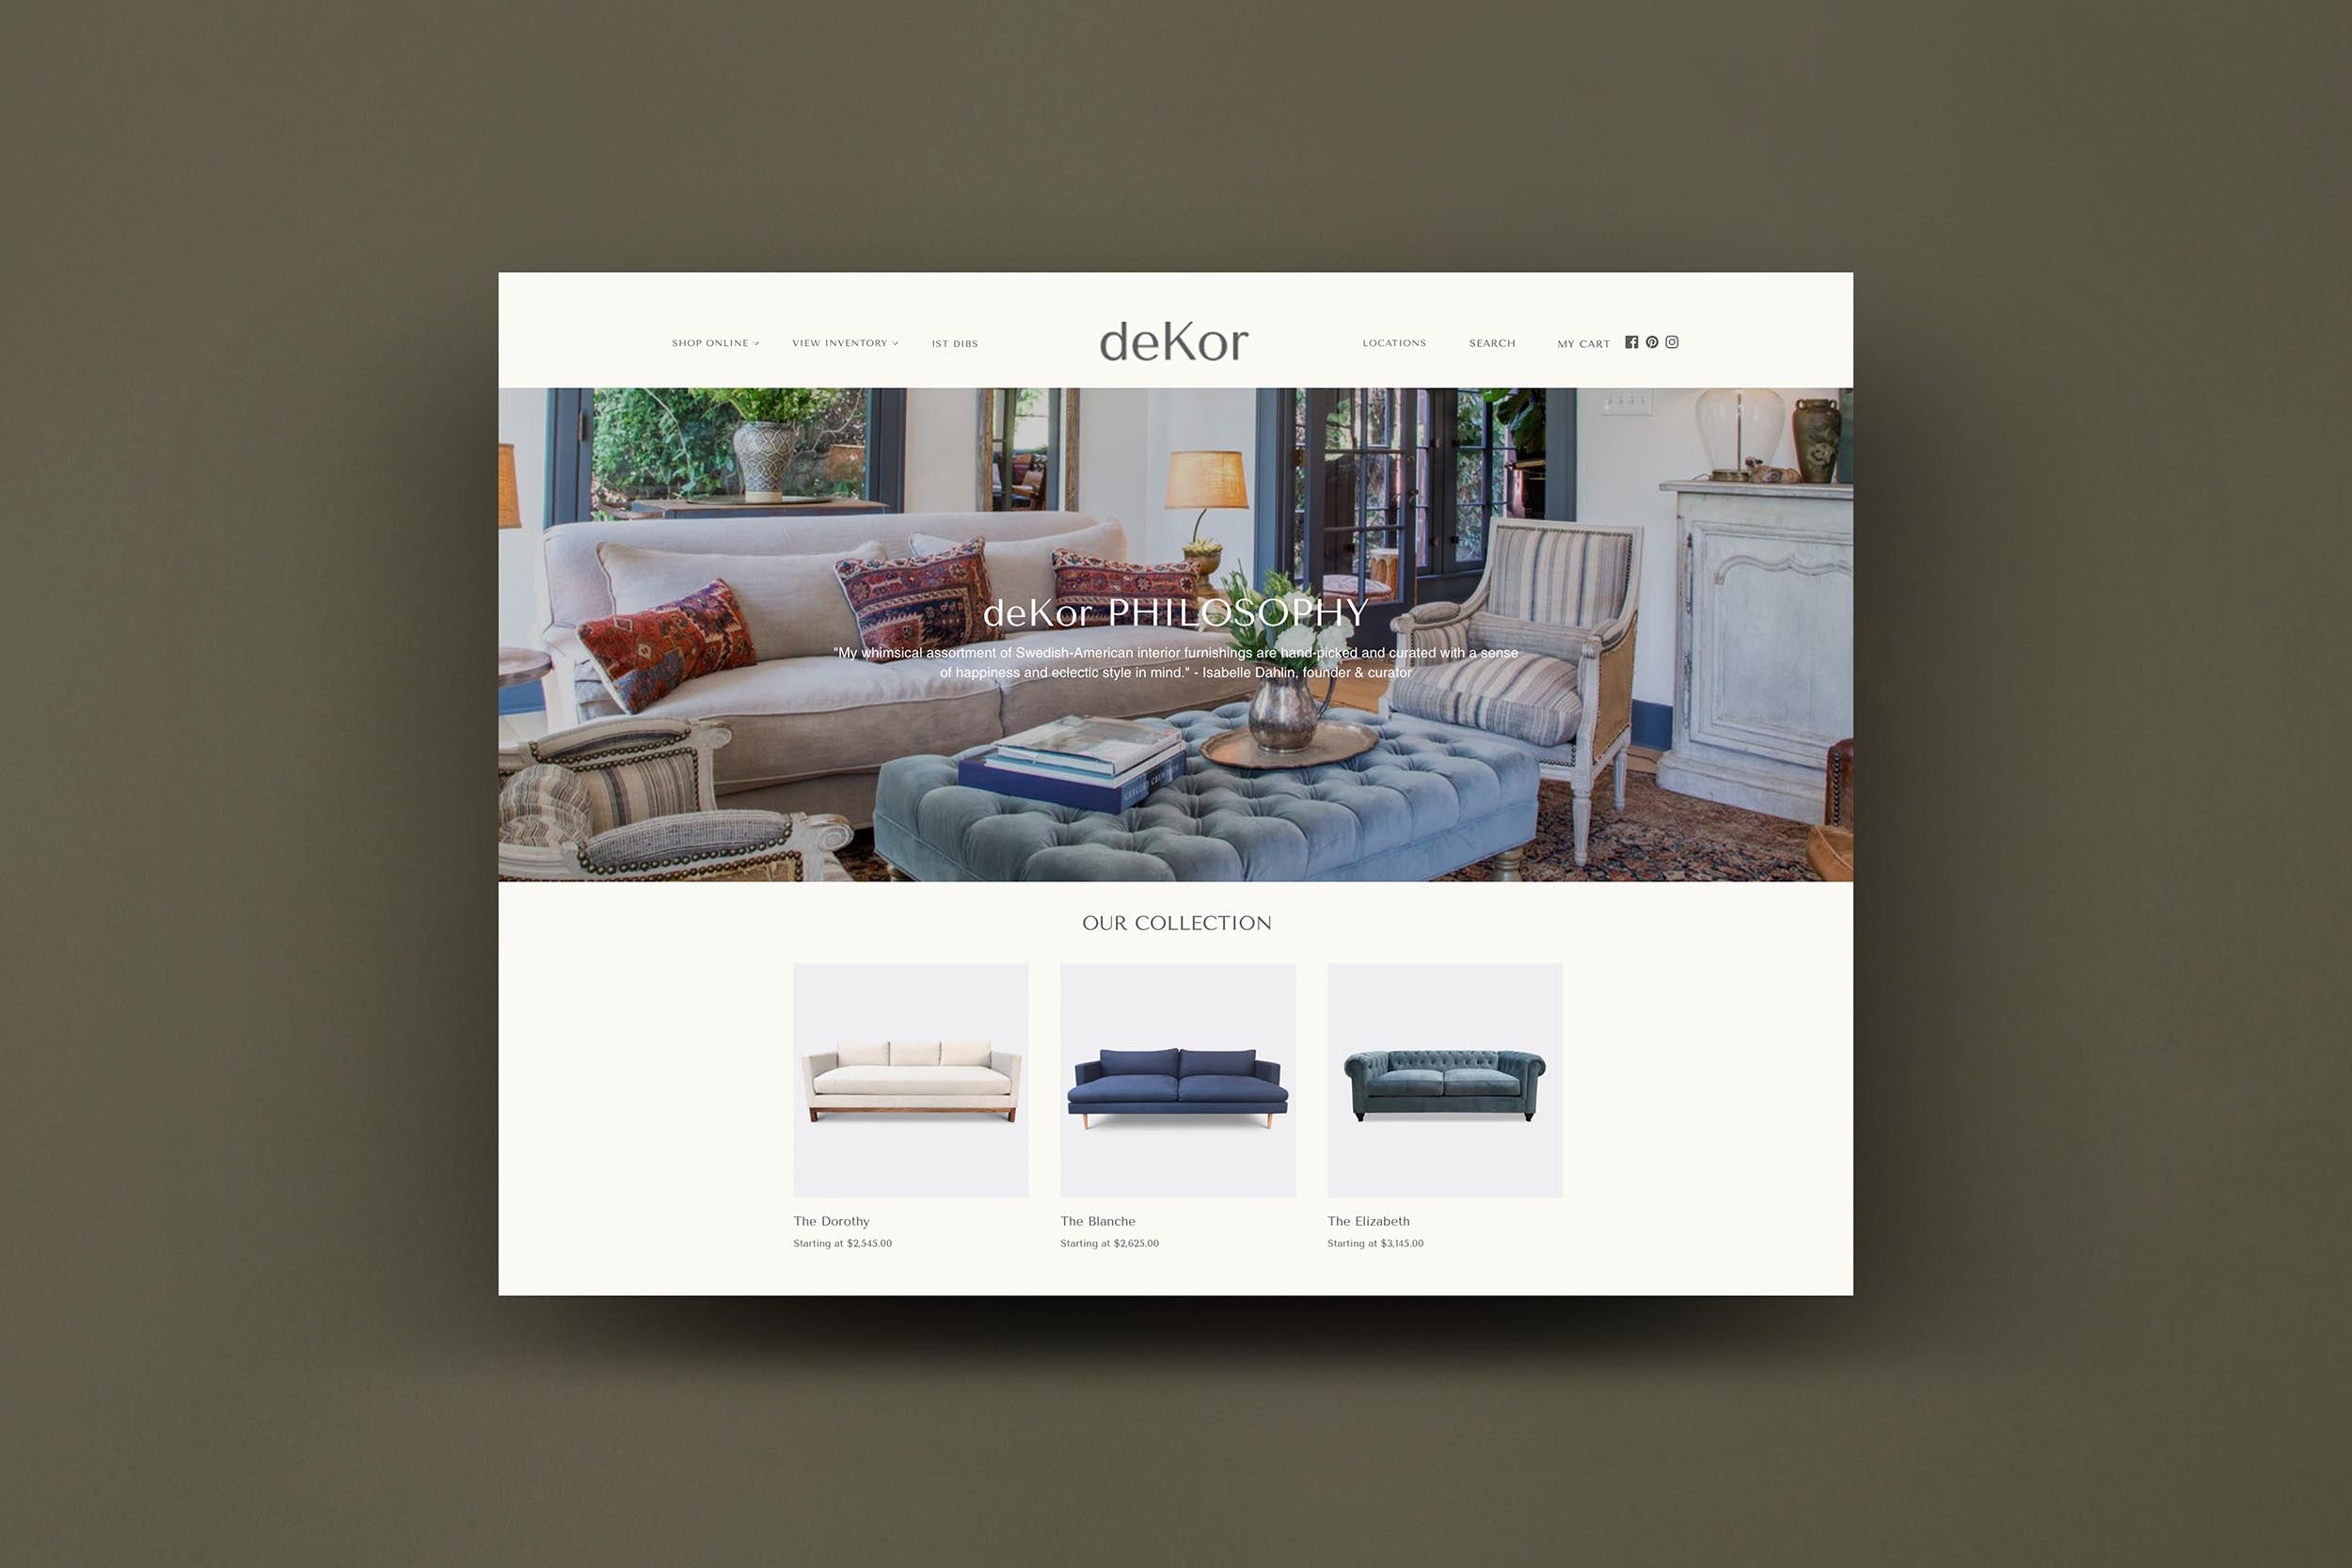 deKor shopify website ecommerce design by Studio Seagraves Design Agency based in St. Louis Missouri Woman owned Female Founded